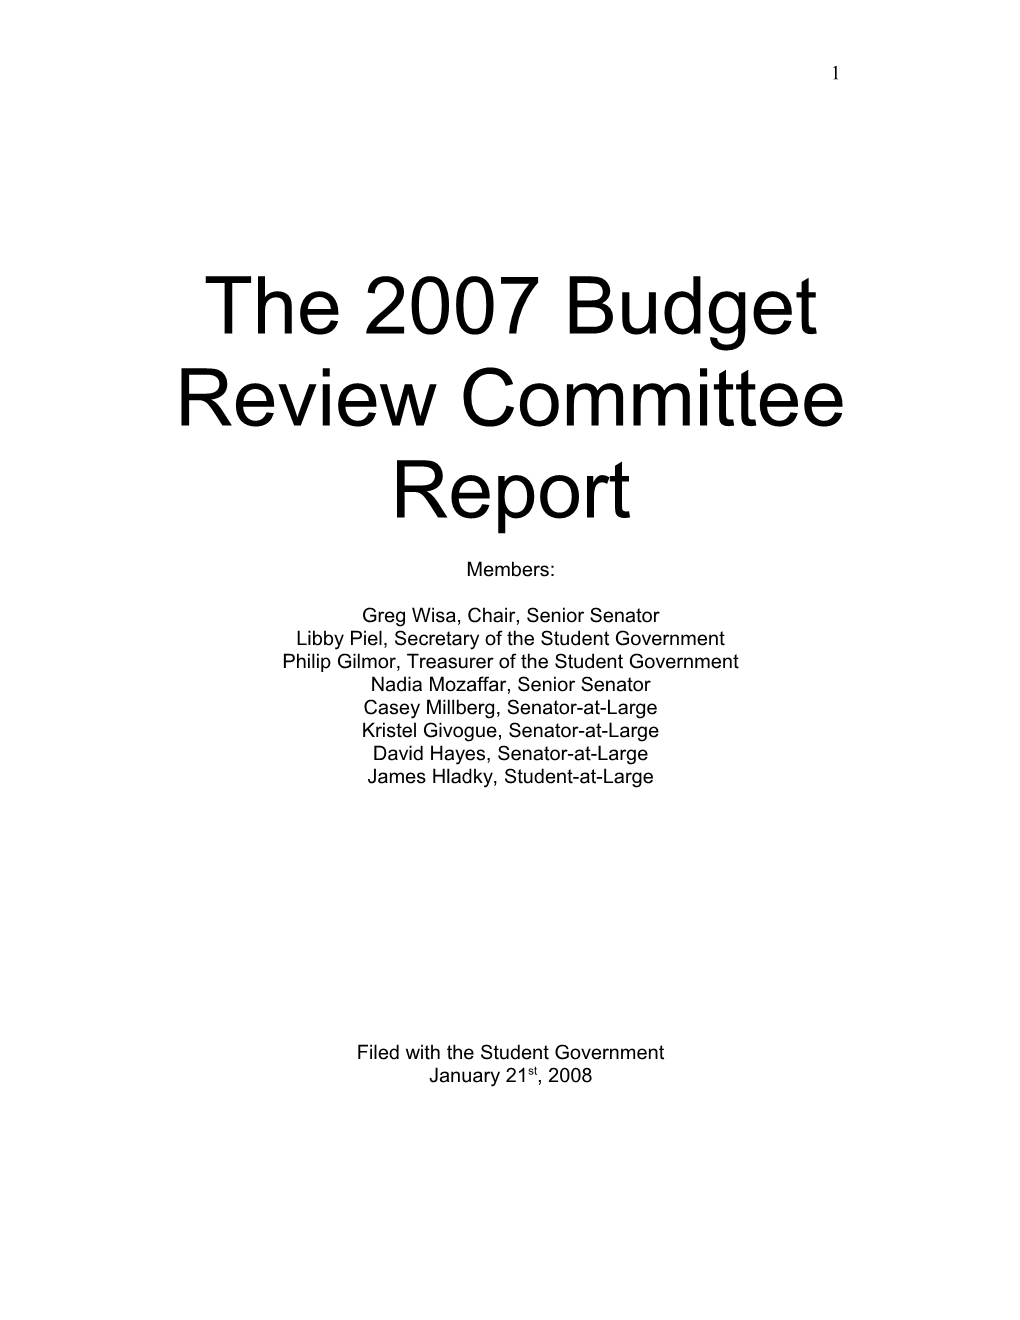 The Budget Review Committee Report